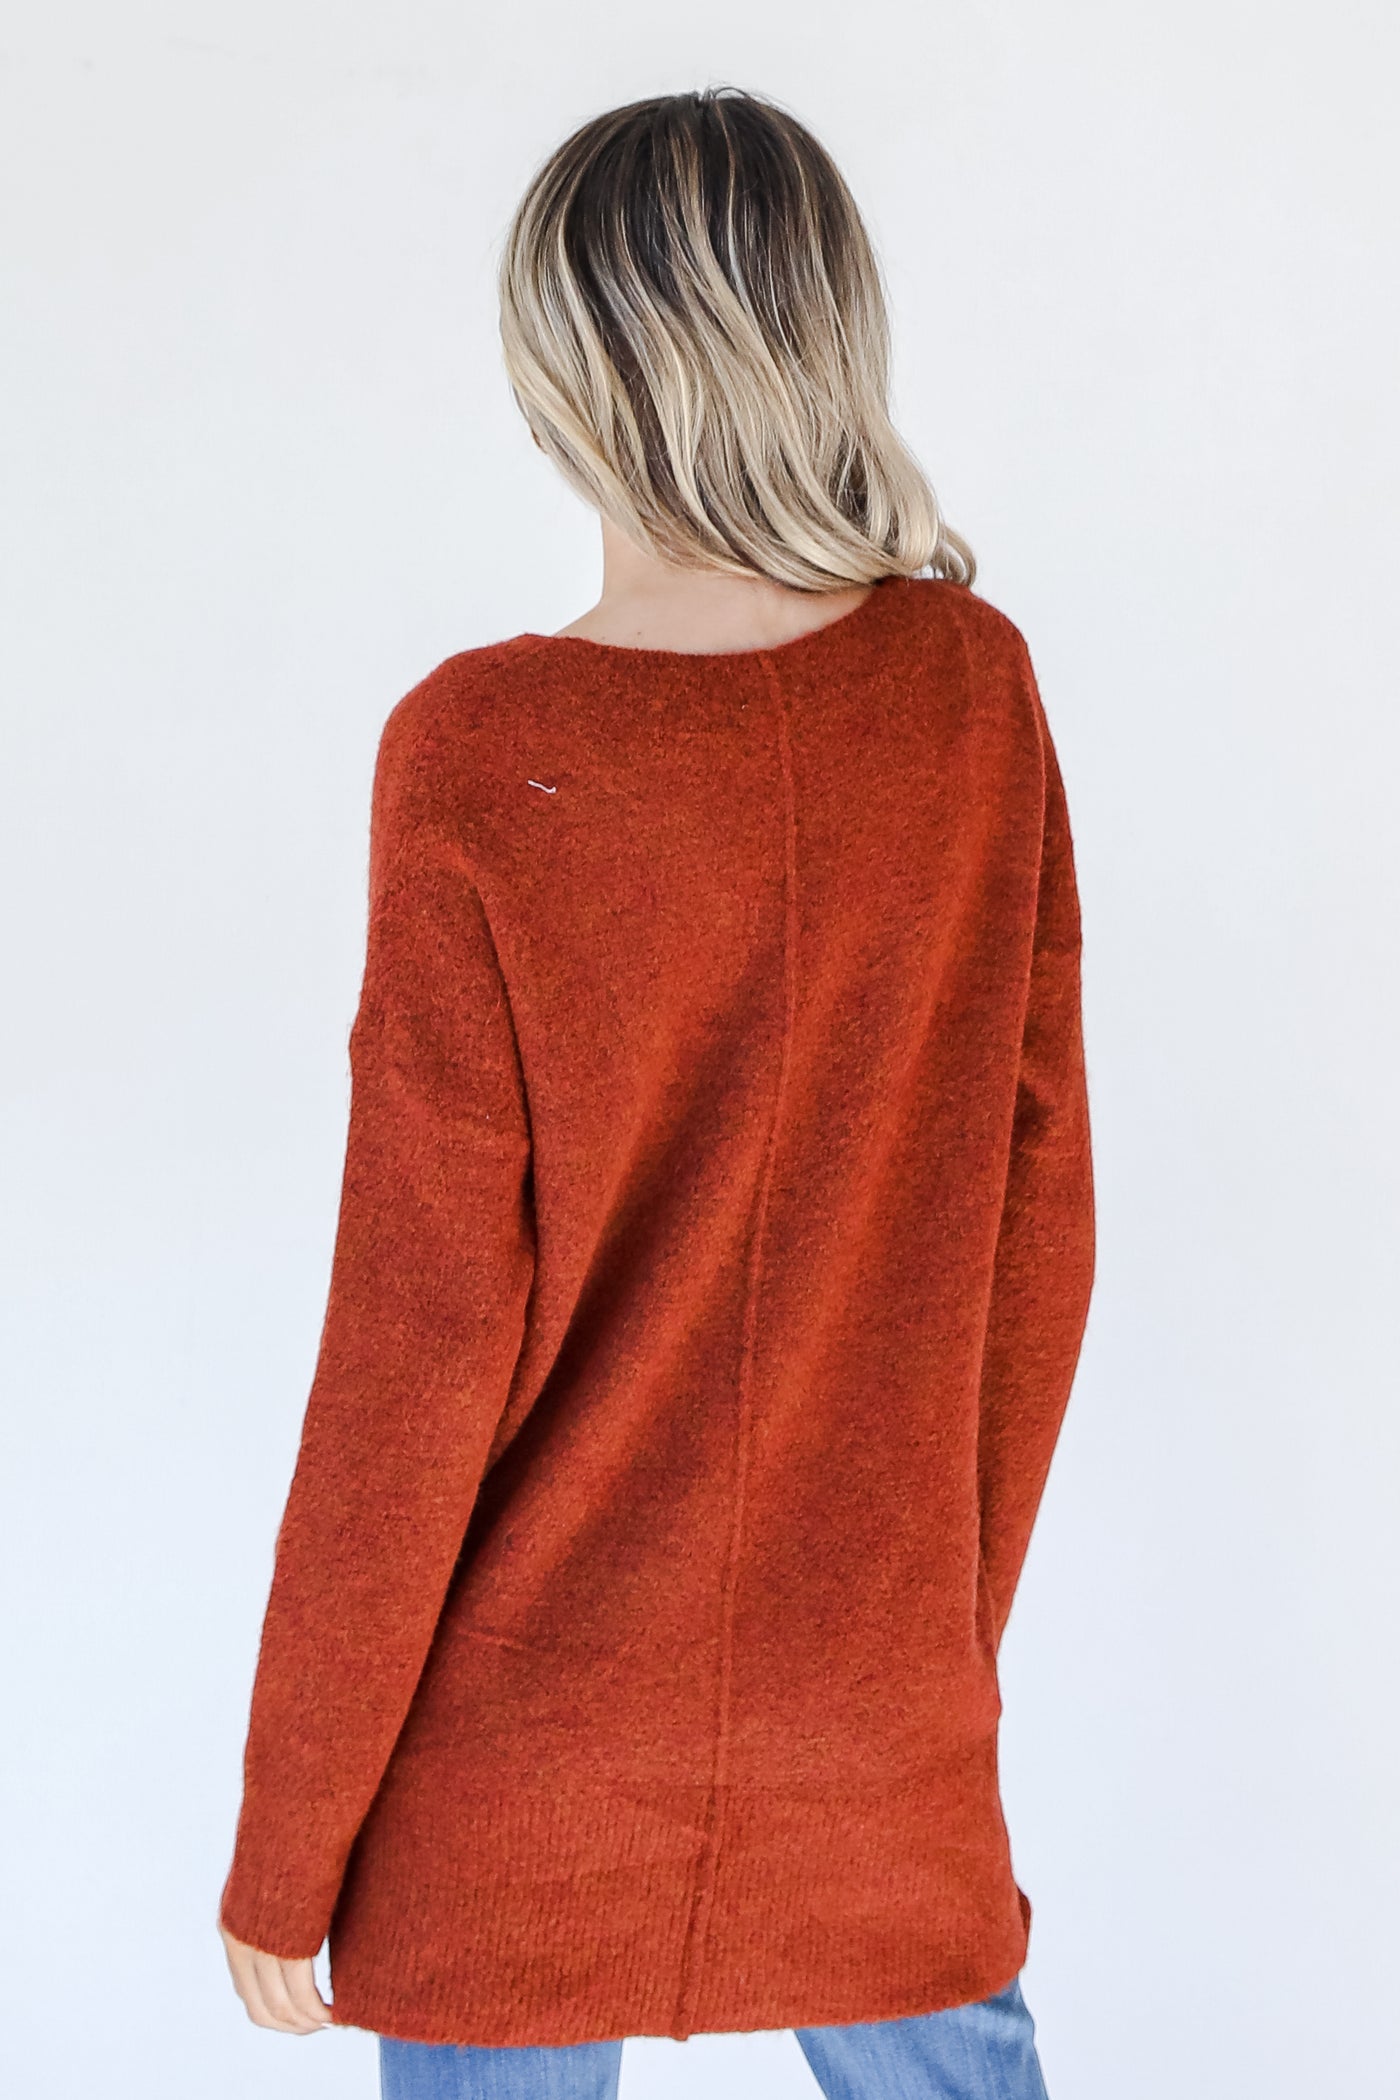 Oversized Sweater in rust back view